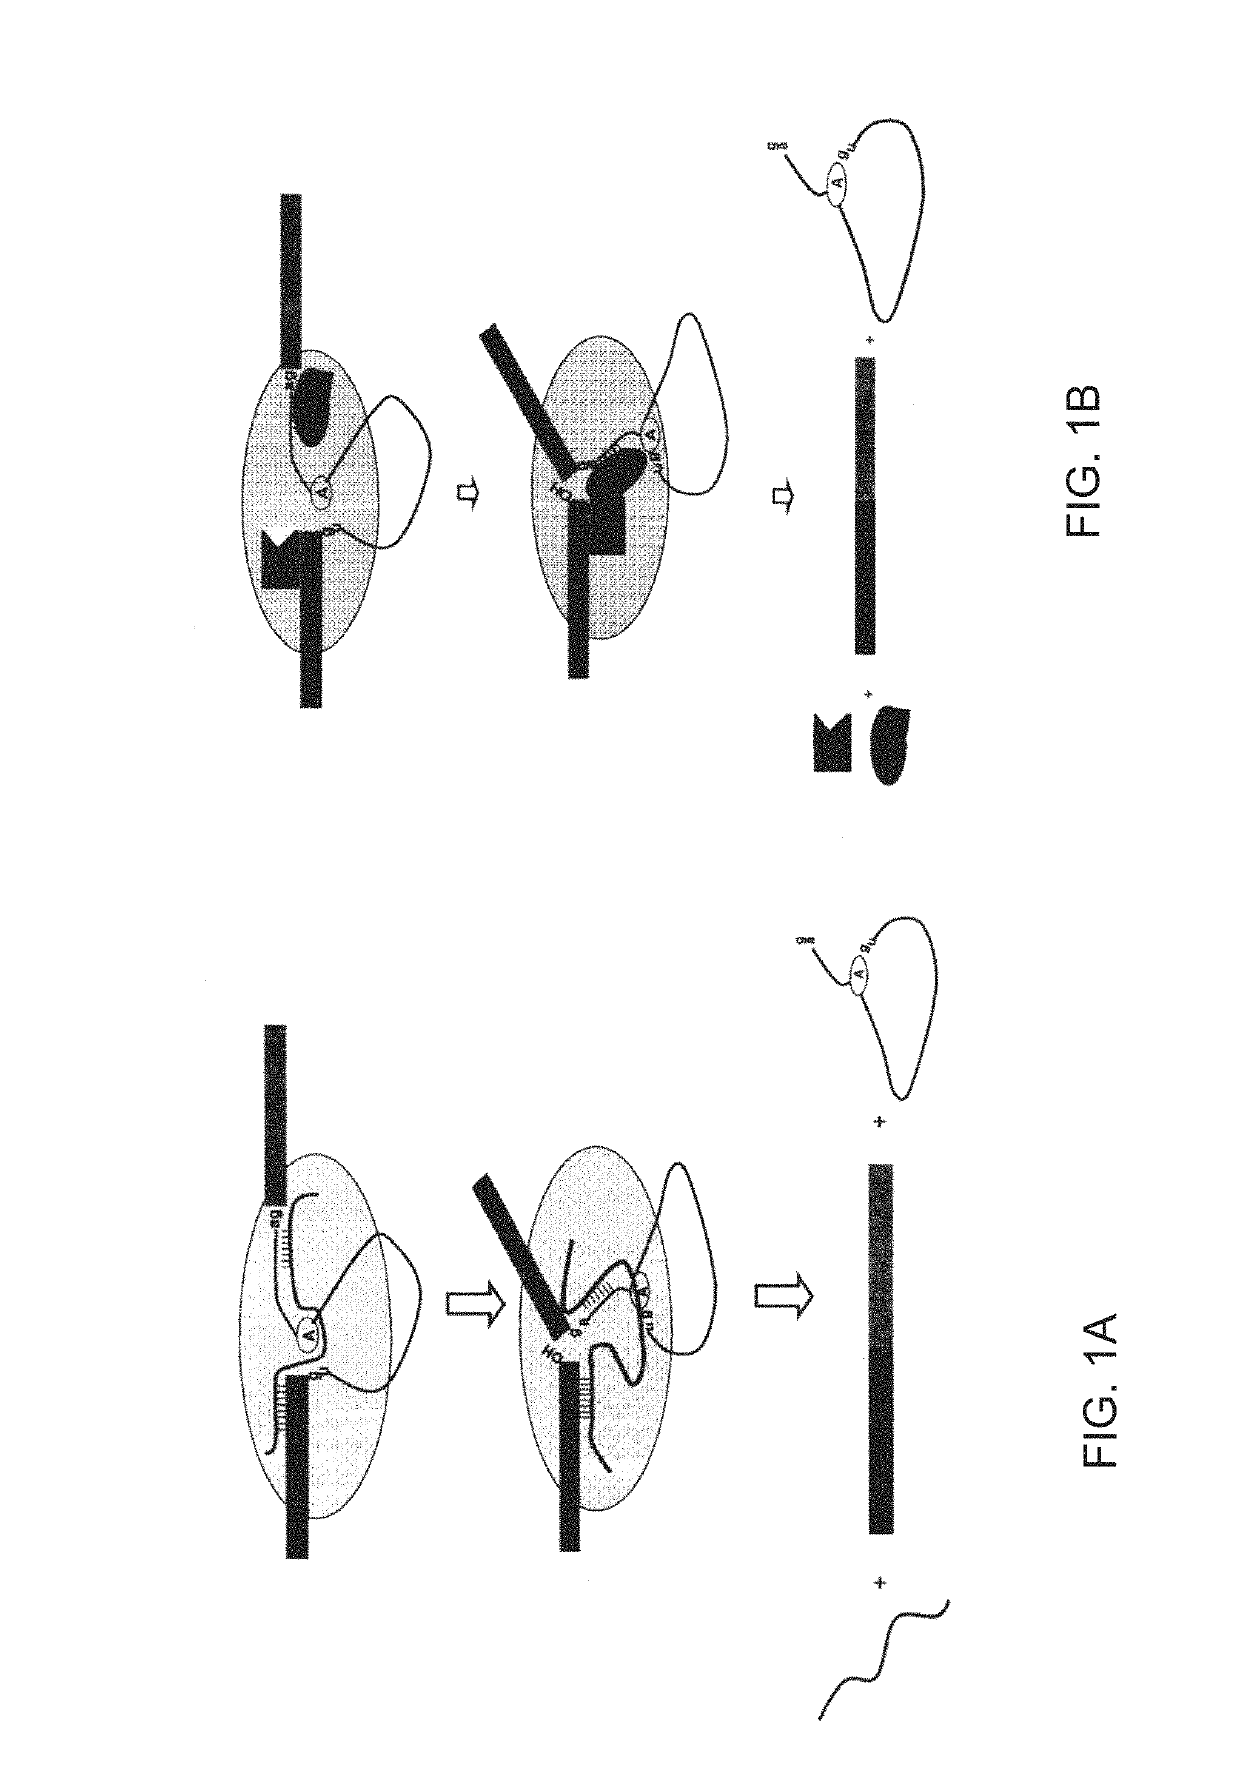 System and method for analyzing splicing codes of spliceosomal introns